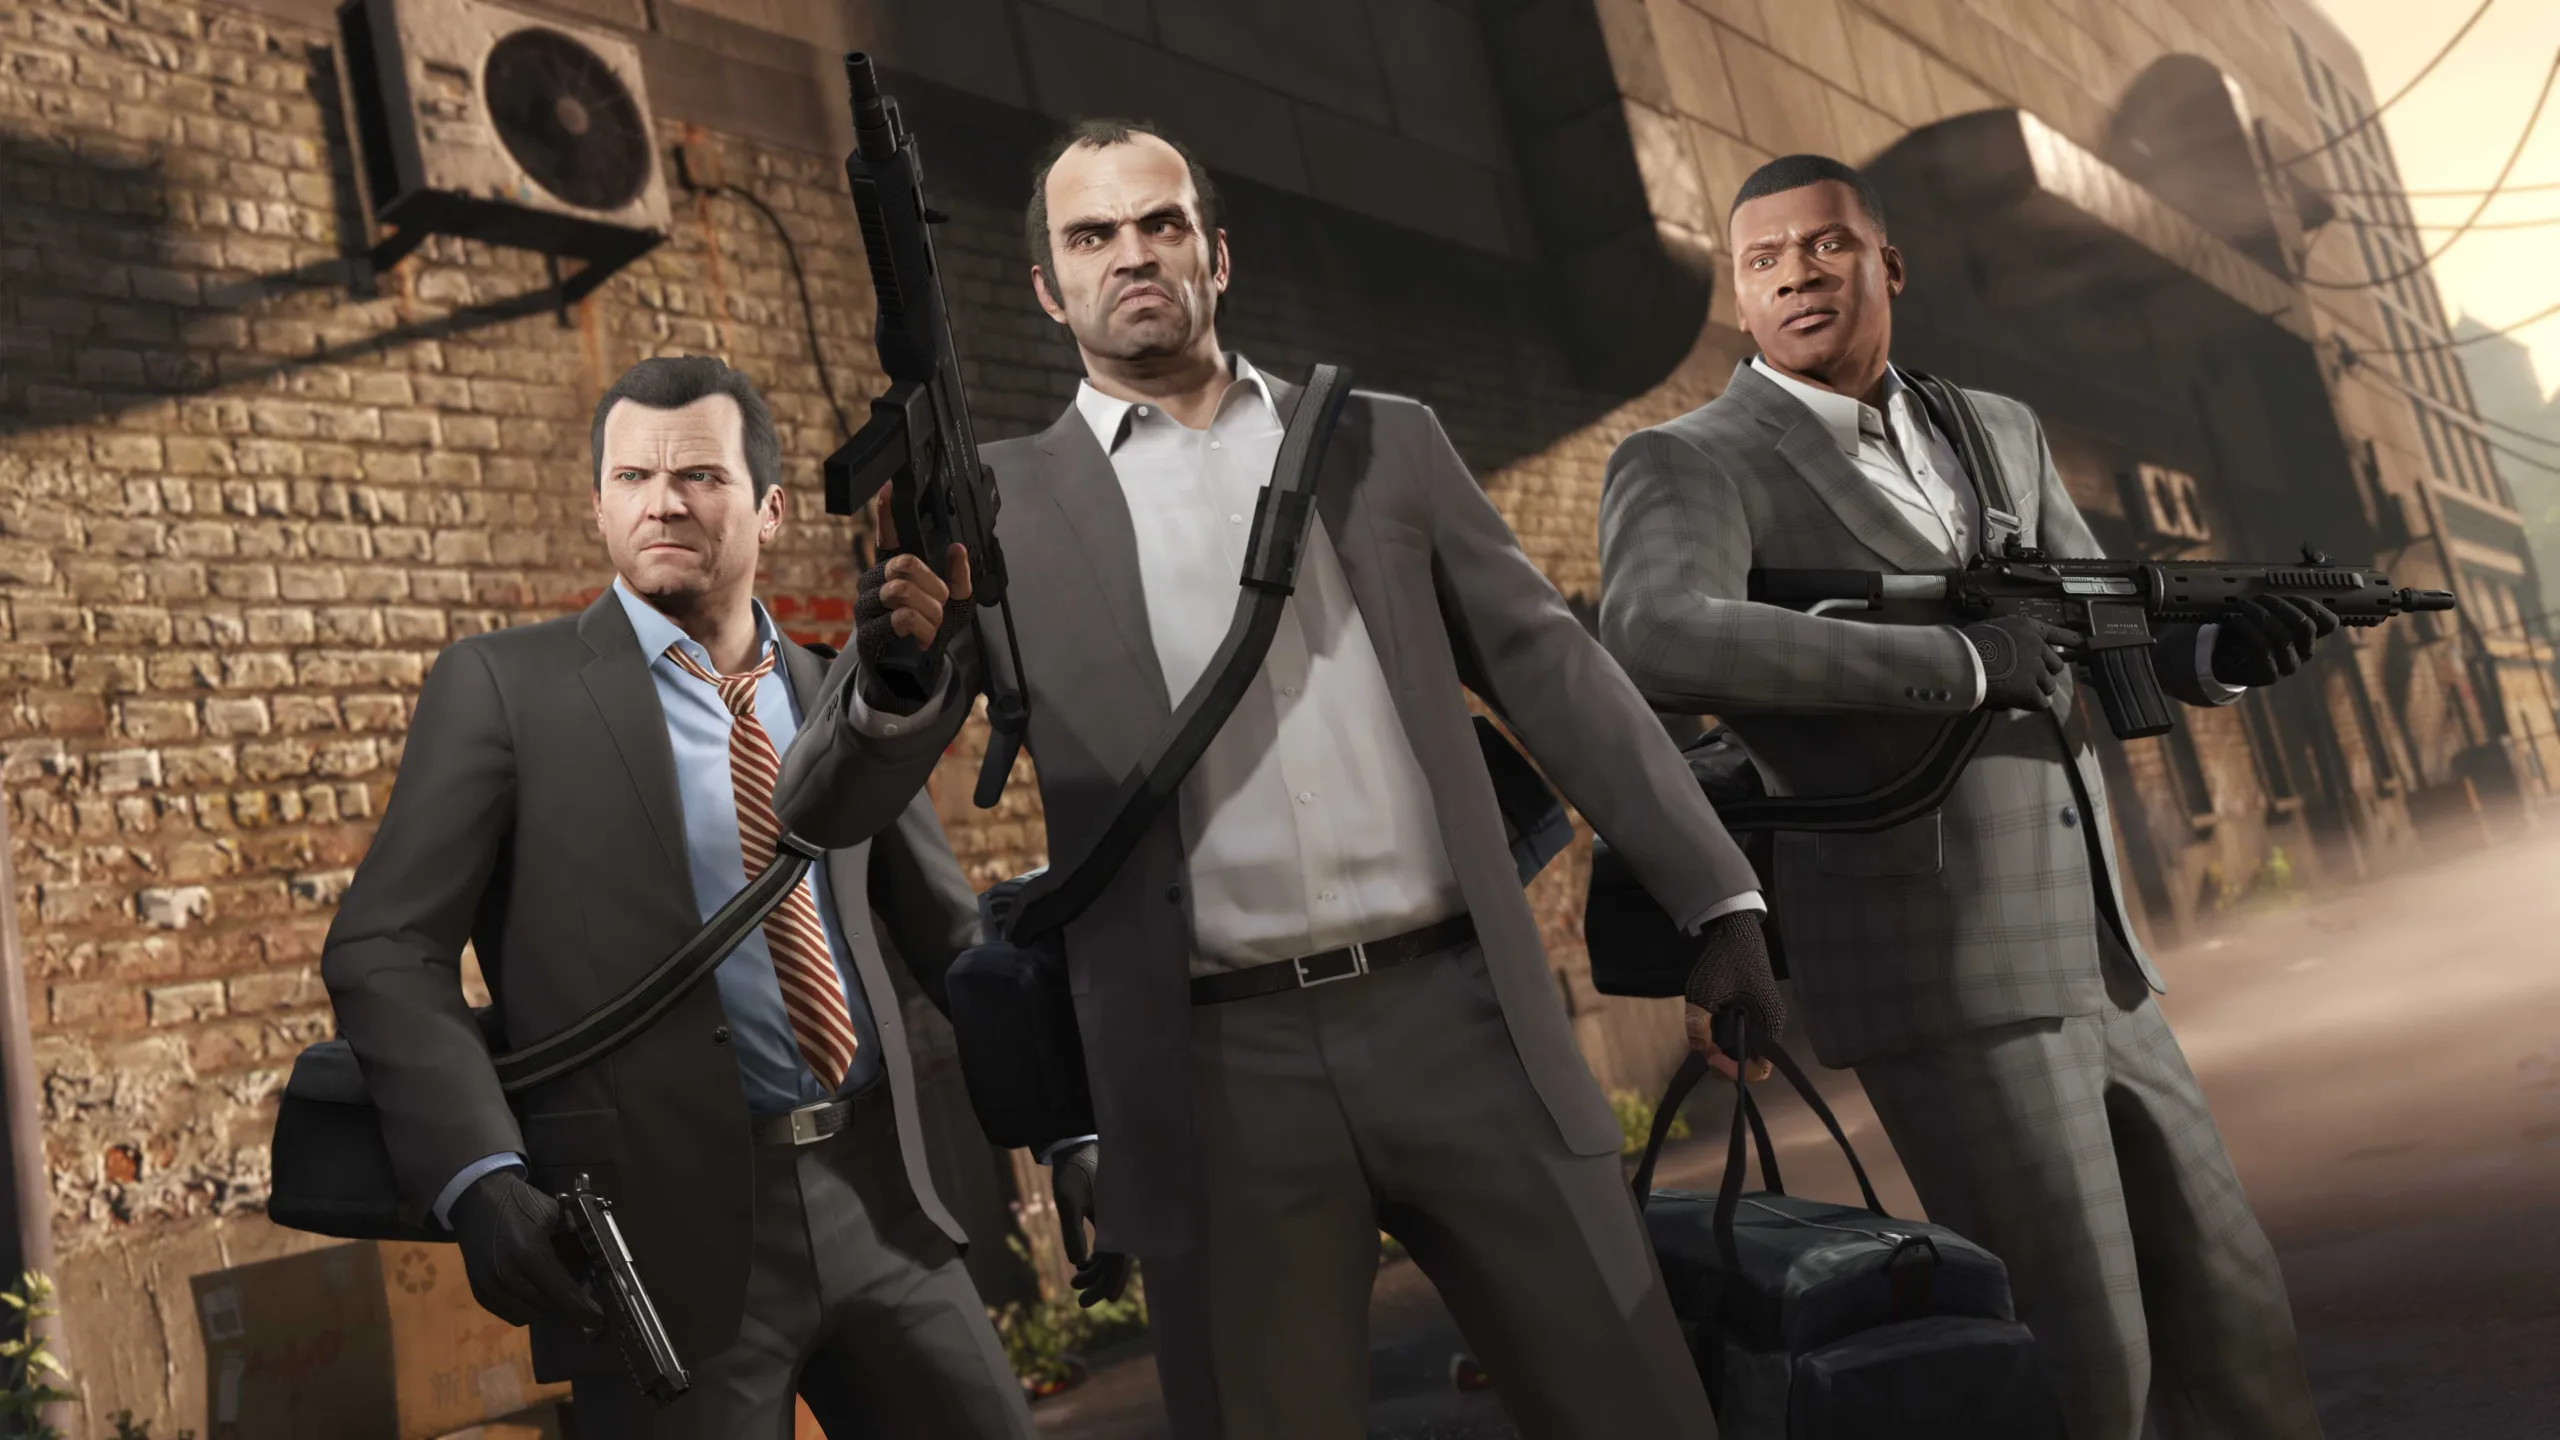 Rockstar Officially Working With GTA Roleplay Server Team, Sparking Fresh Excitement About GTA 6